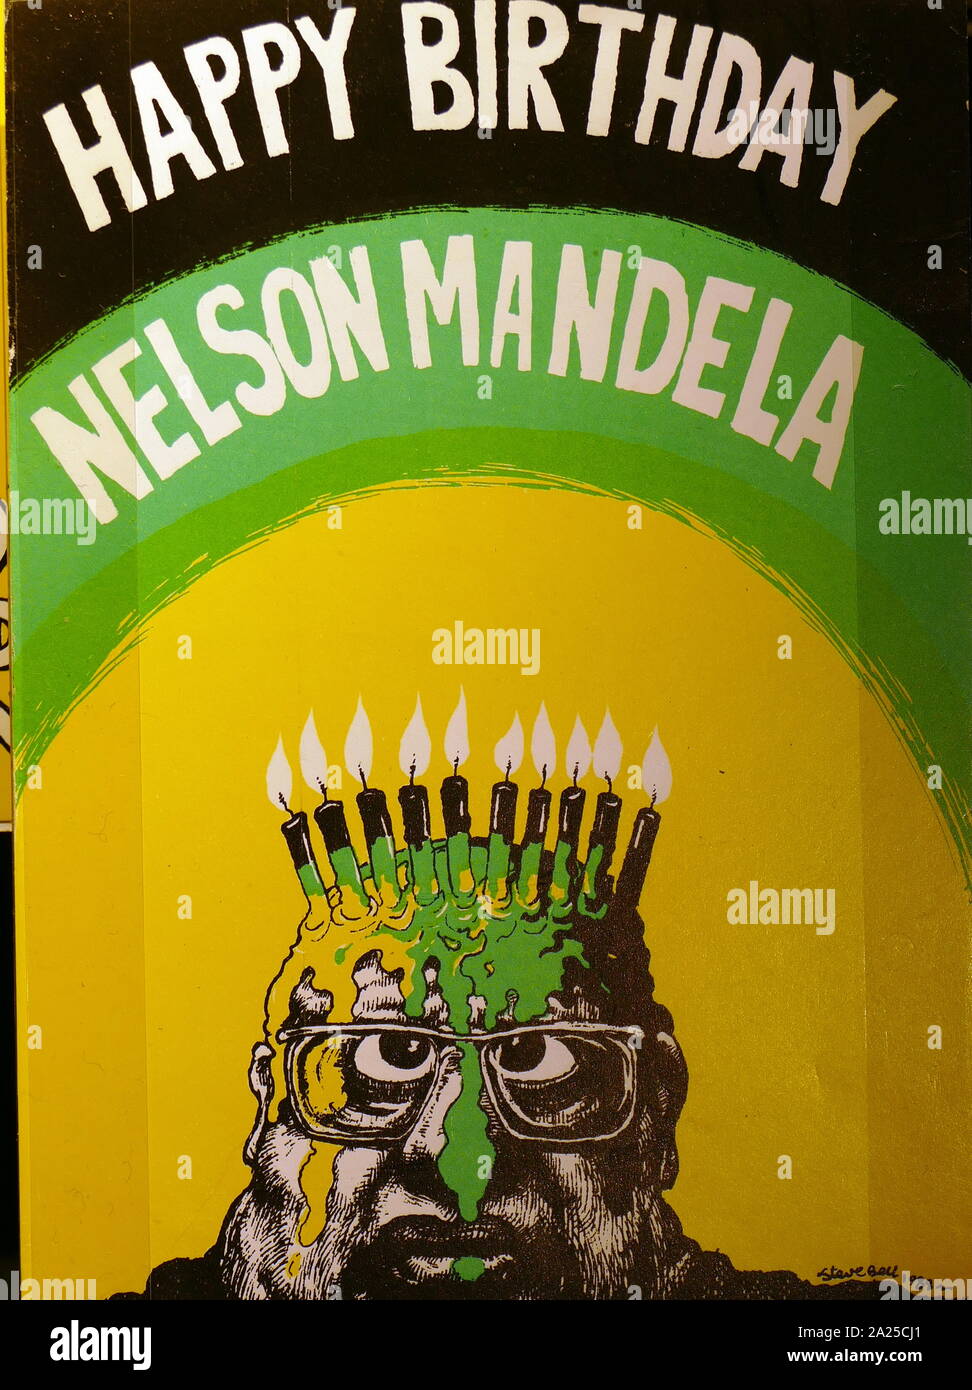 Propaganda poster for Nelson Mandela depicting Pik Botha the leader of the Apartheid administration. 1983. Apartheid was a system of institutionalised racial segregation that existed in South Africa from 1948 until the early 1990s. Apartheid was characterised by an authoritarian political culture based on baasskap (or white supremacy), which encouraged state repression of Black African, Coloured, and Asian South Africans for the benefit of the nation's minority white population. Stock Photo